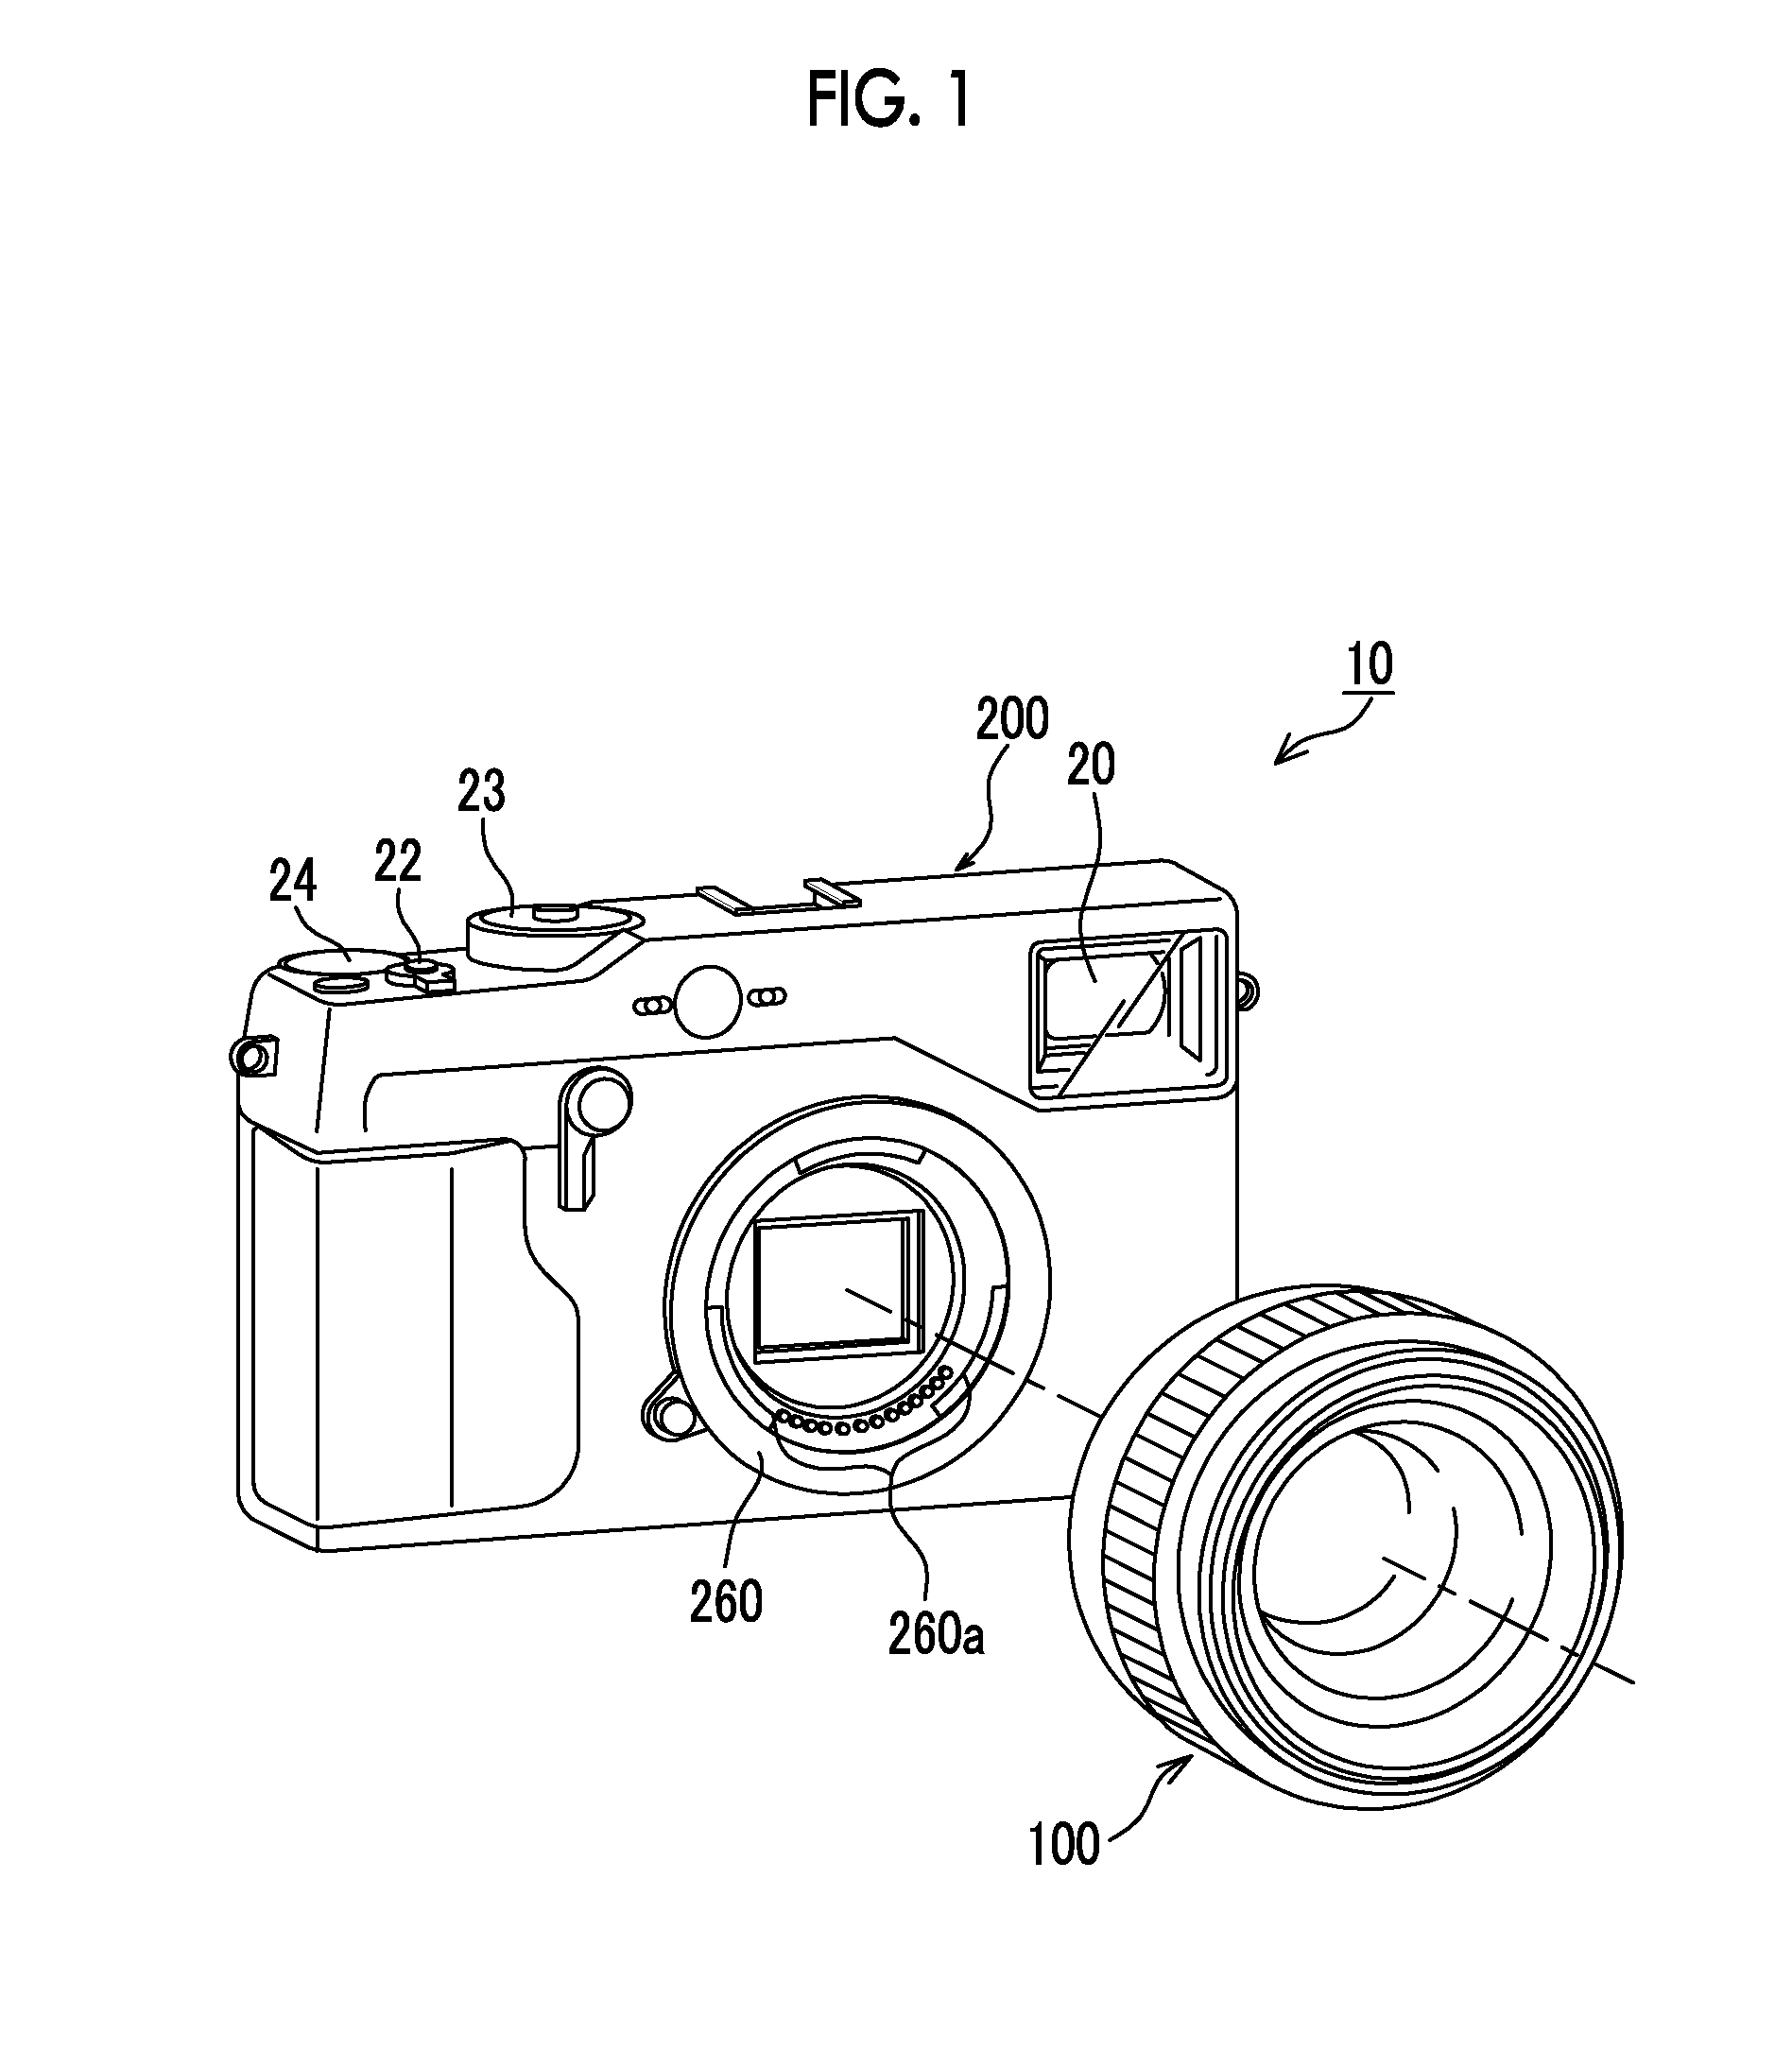 Camera system, camera body, interchangeable lens, and communication method